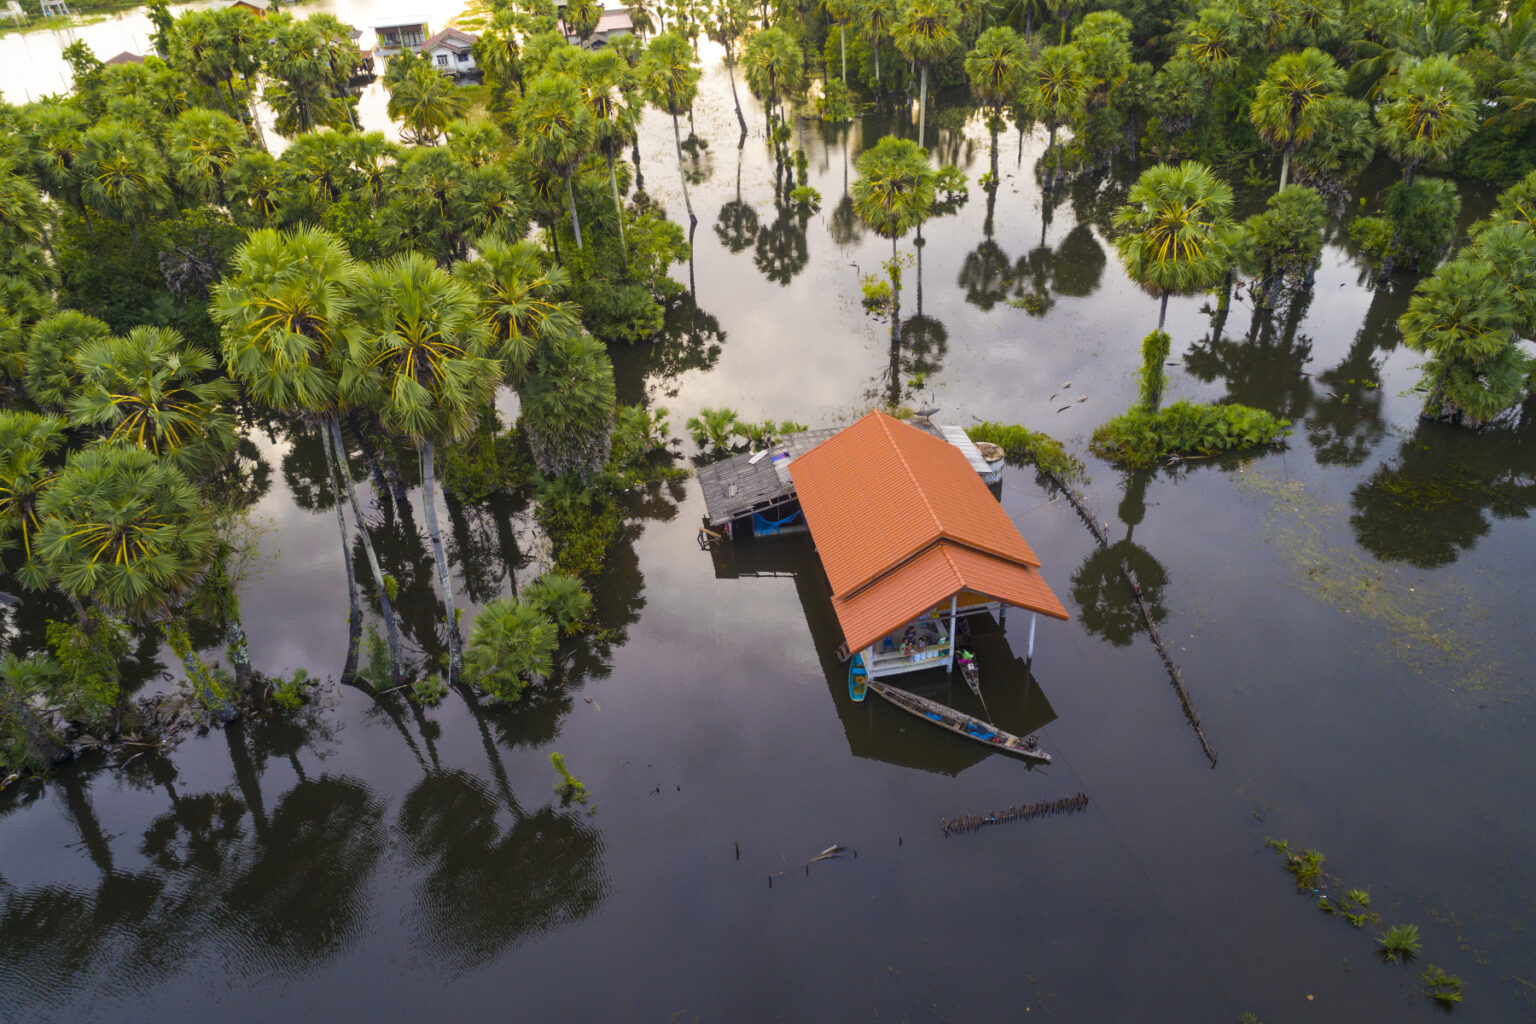 aerial view of a flooded area, filled with trees, a house, and (of course) lots of water.